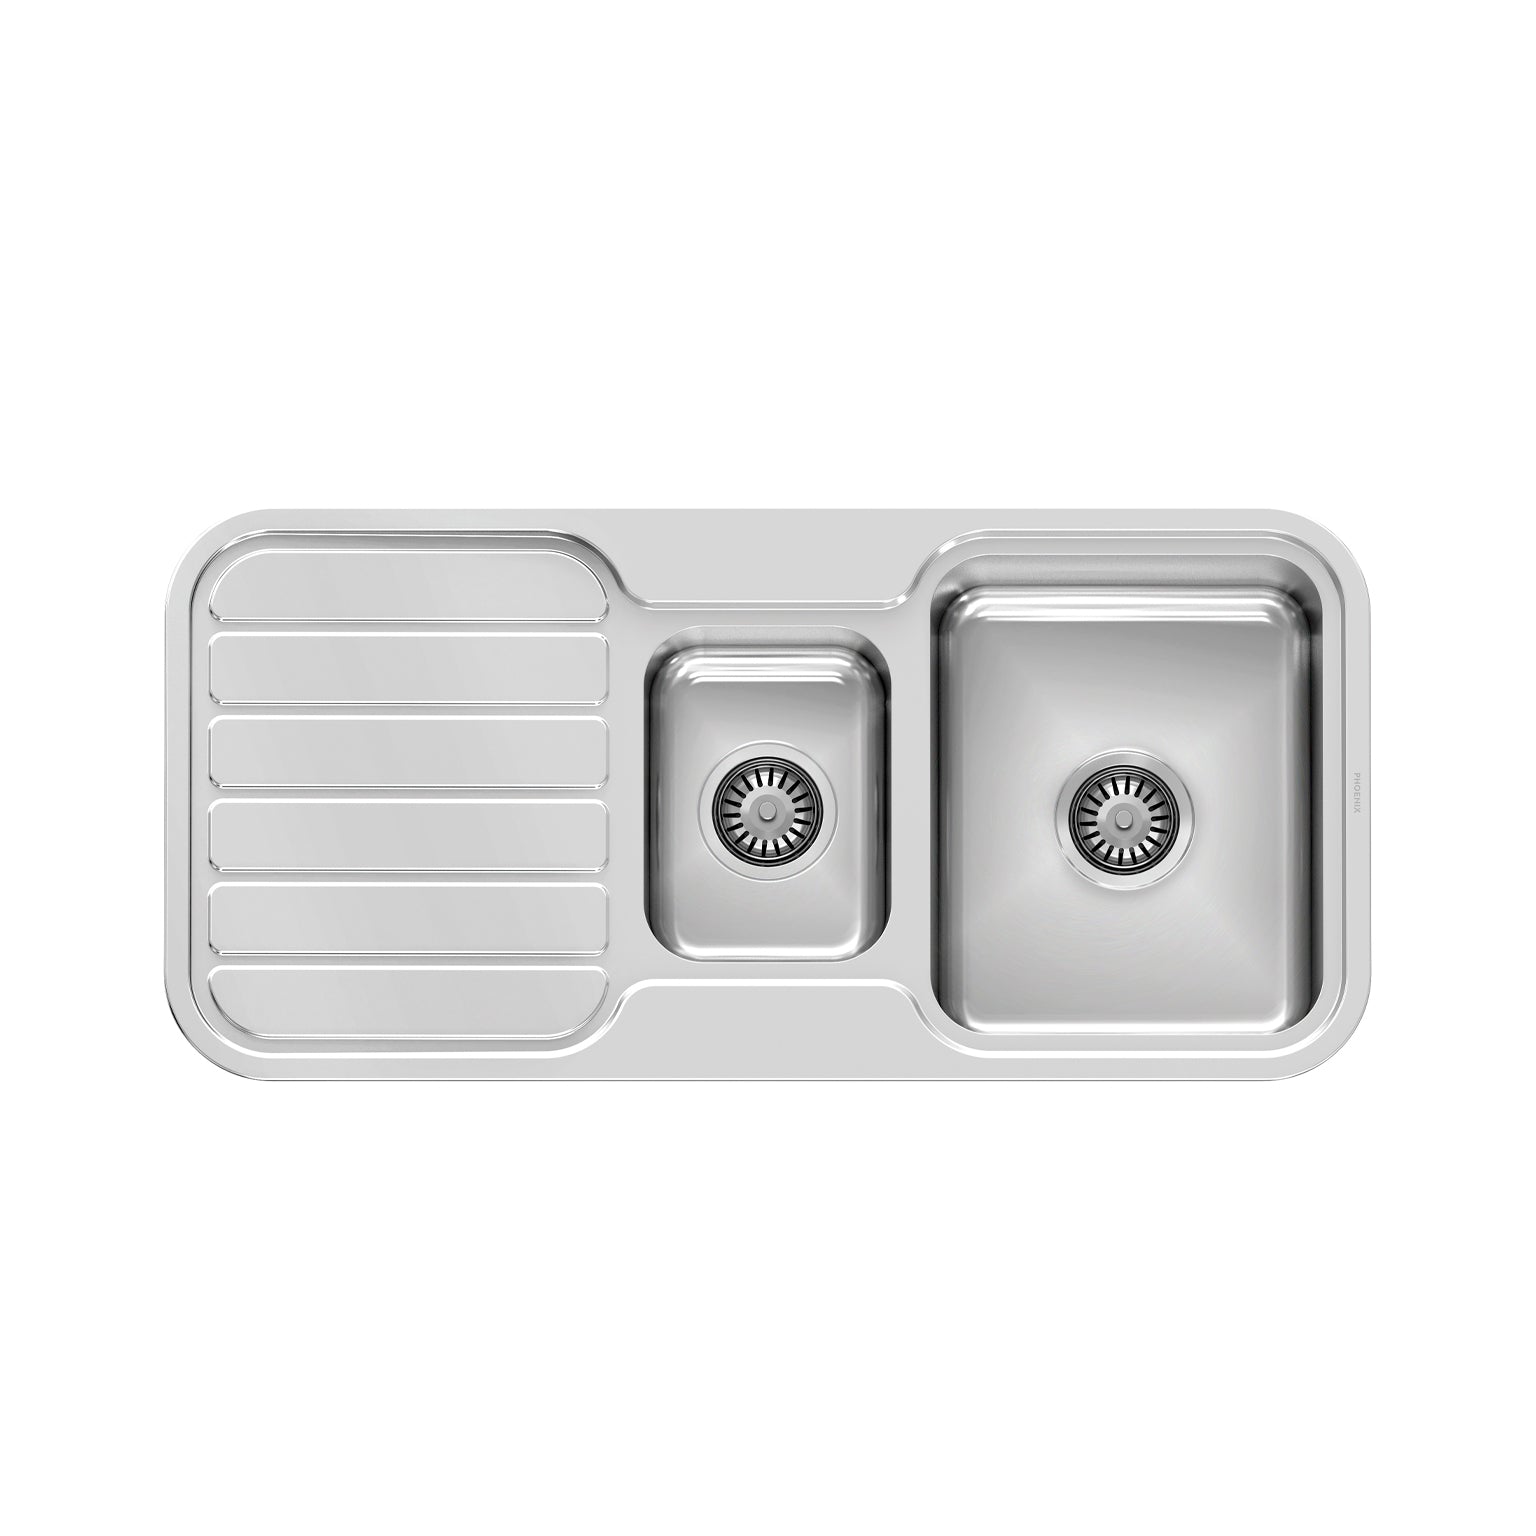 PHOENIX 1000 SERIES 1 AND 1/3 BOWL SINK WITH DRAINER AND NO TAPHOLE 1000MM